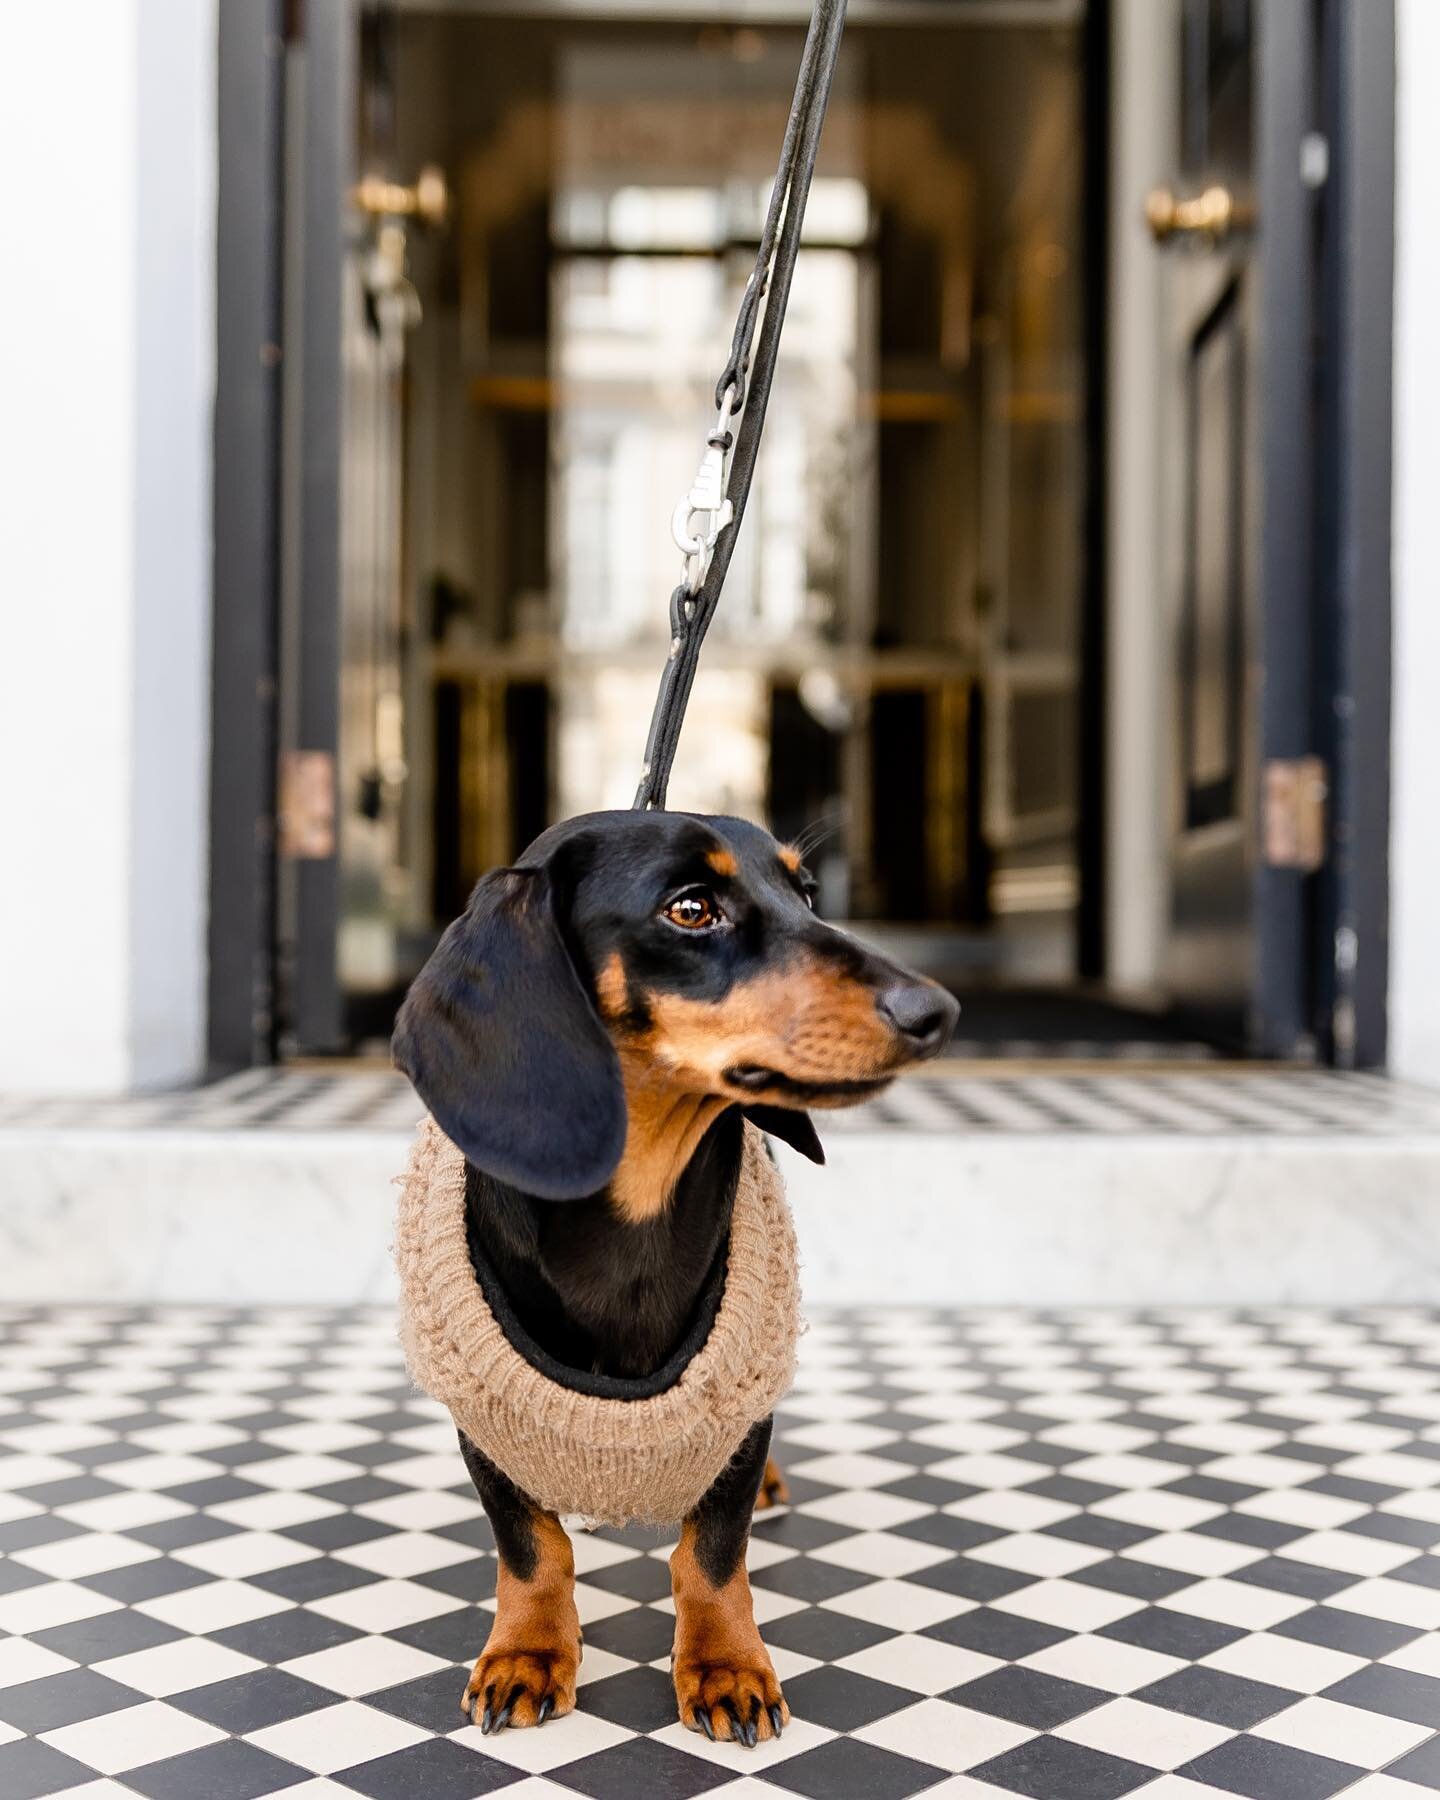 Hudson of @hudsonandsookiethedachshunds came to brunch with us this weekend at @thelaslett and I couldn&rsquo;t resist taking his picture! Don&rsquo;t tell the others, but I think my four-legged portrait subjects might be my favorite 😉